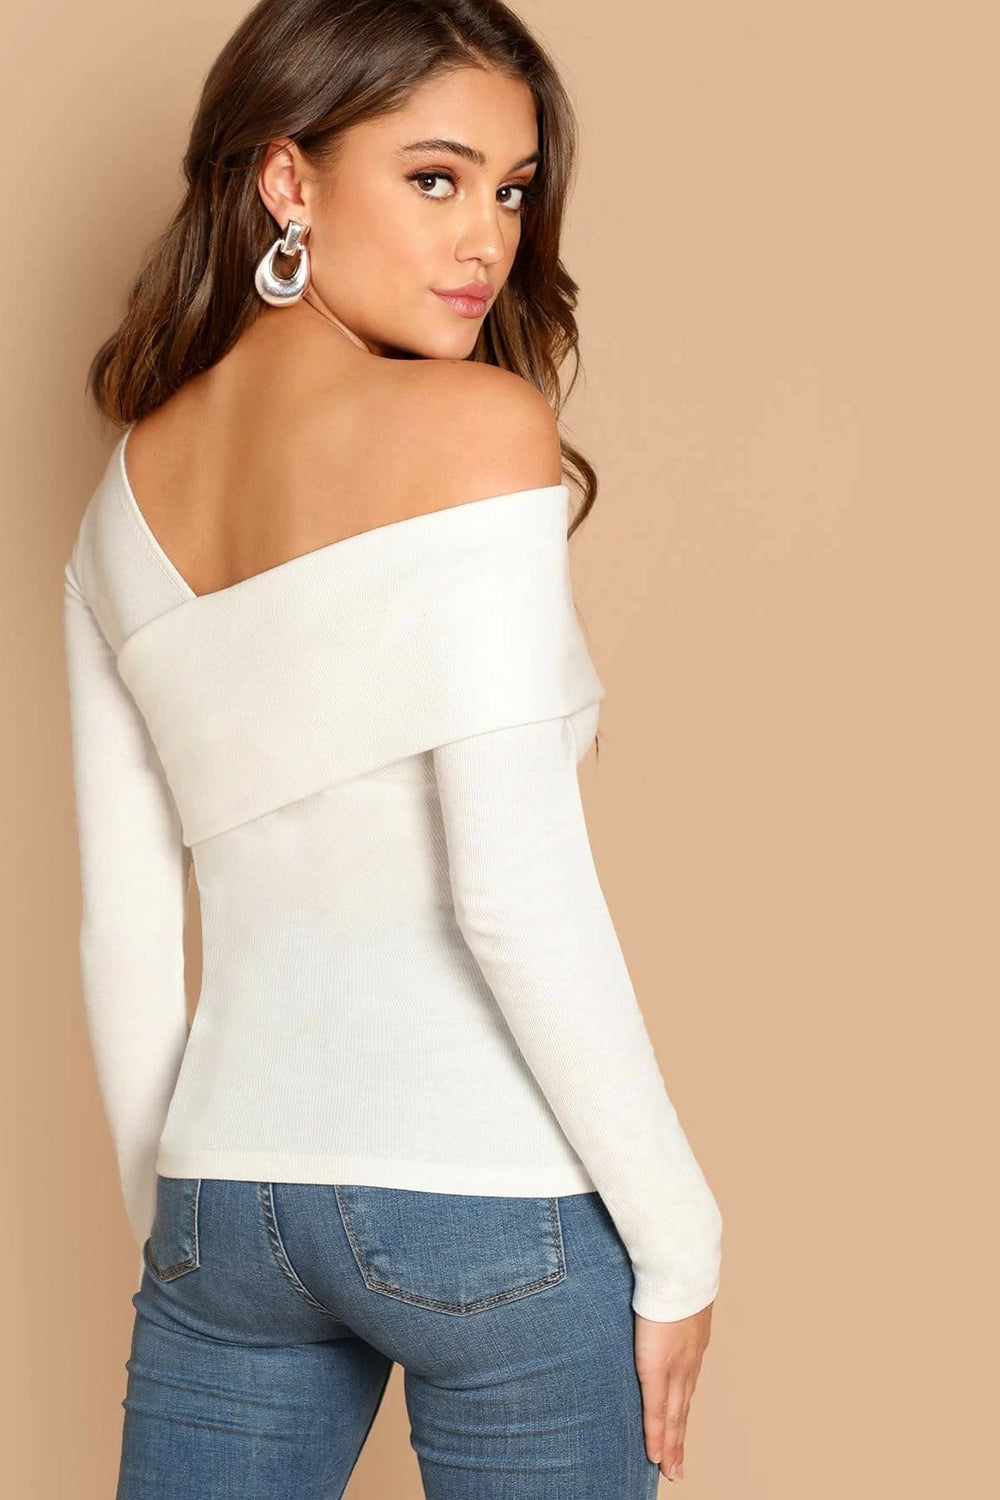 One Shoulder White Top